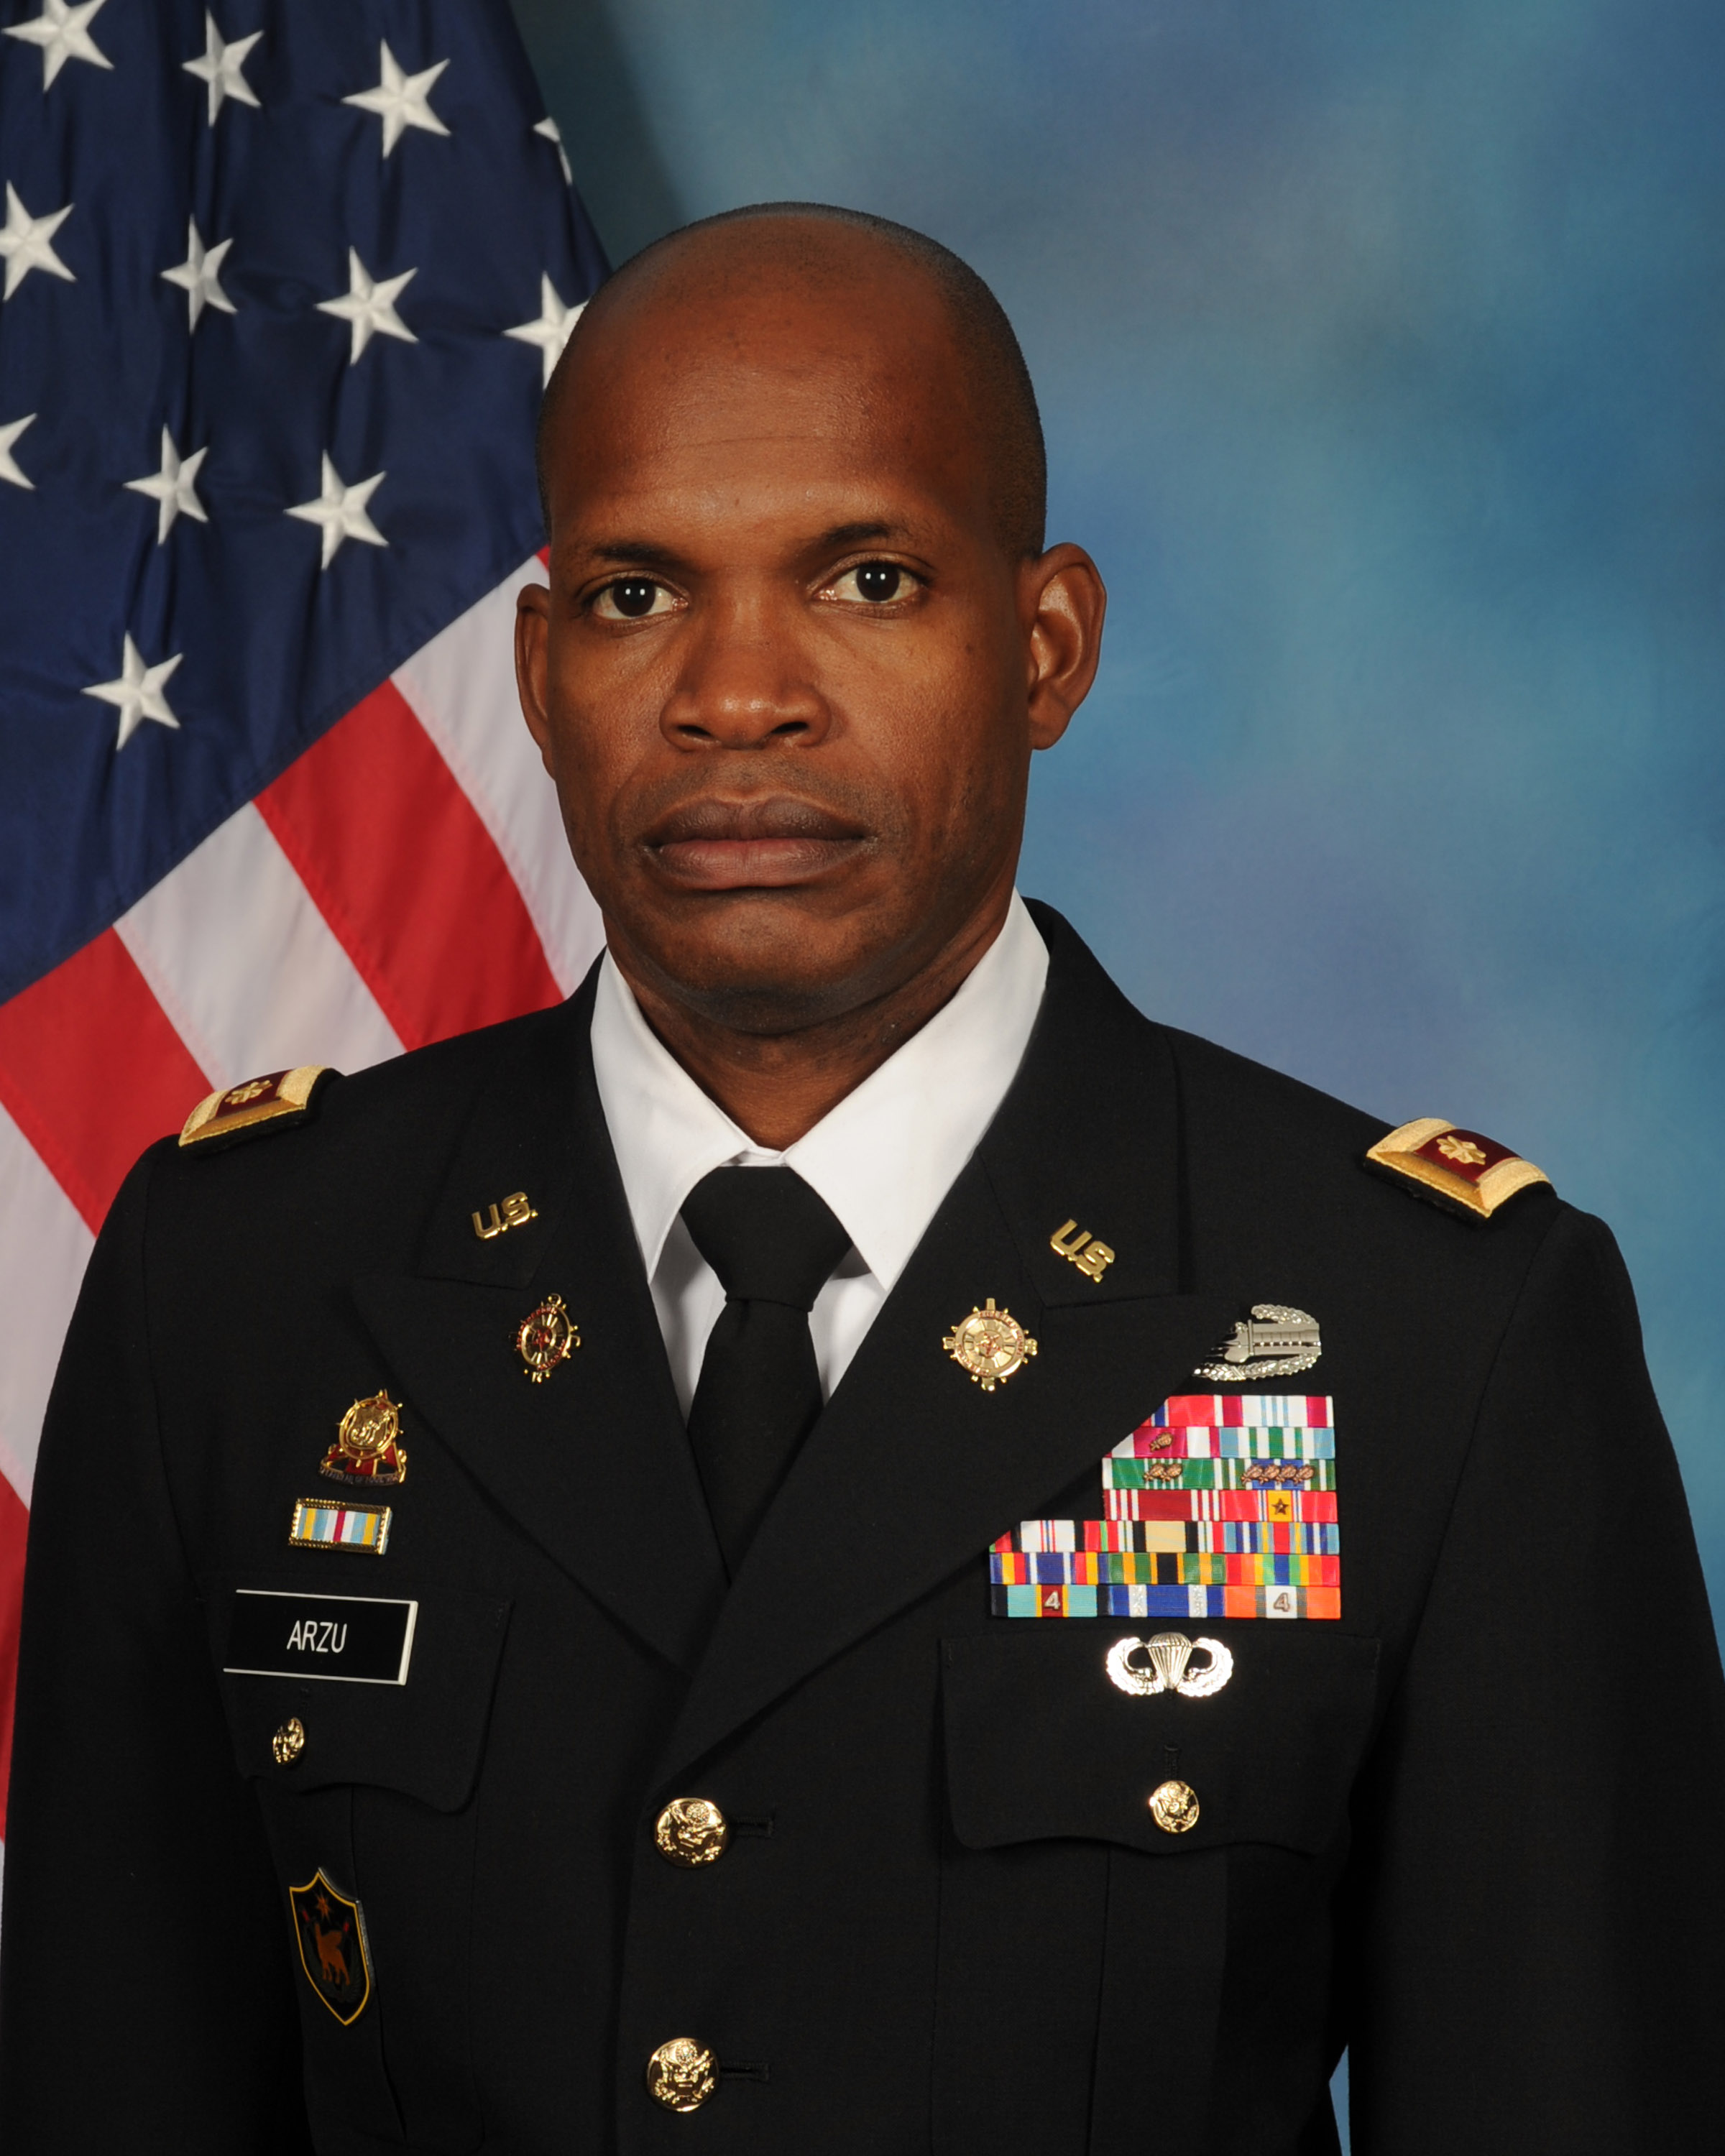 U.S. Army Major, immigrant, honored by ethnic organization > Air Combat ...